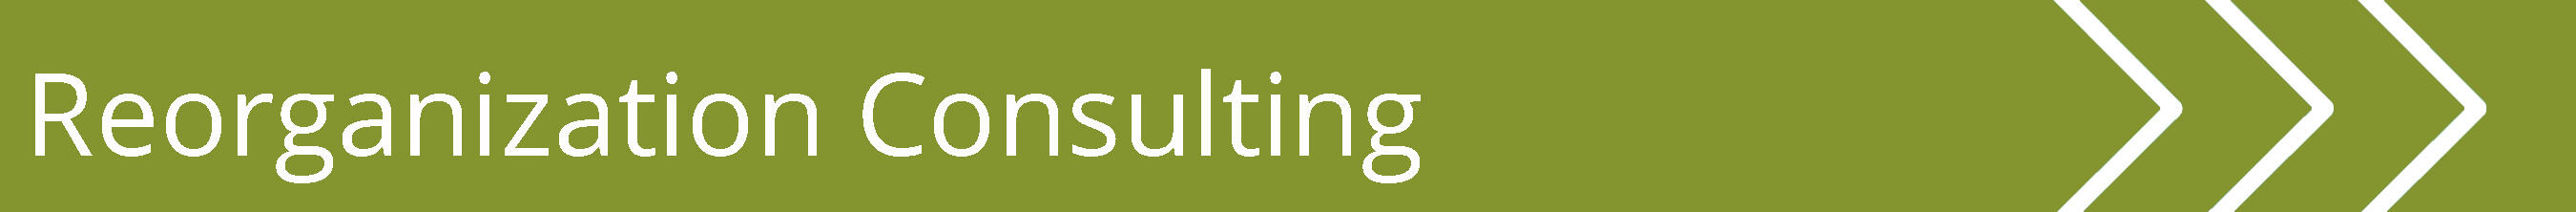 Reorganization Consulting banner